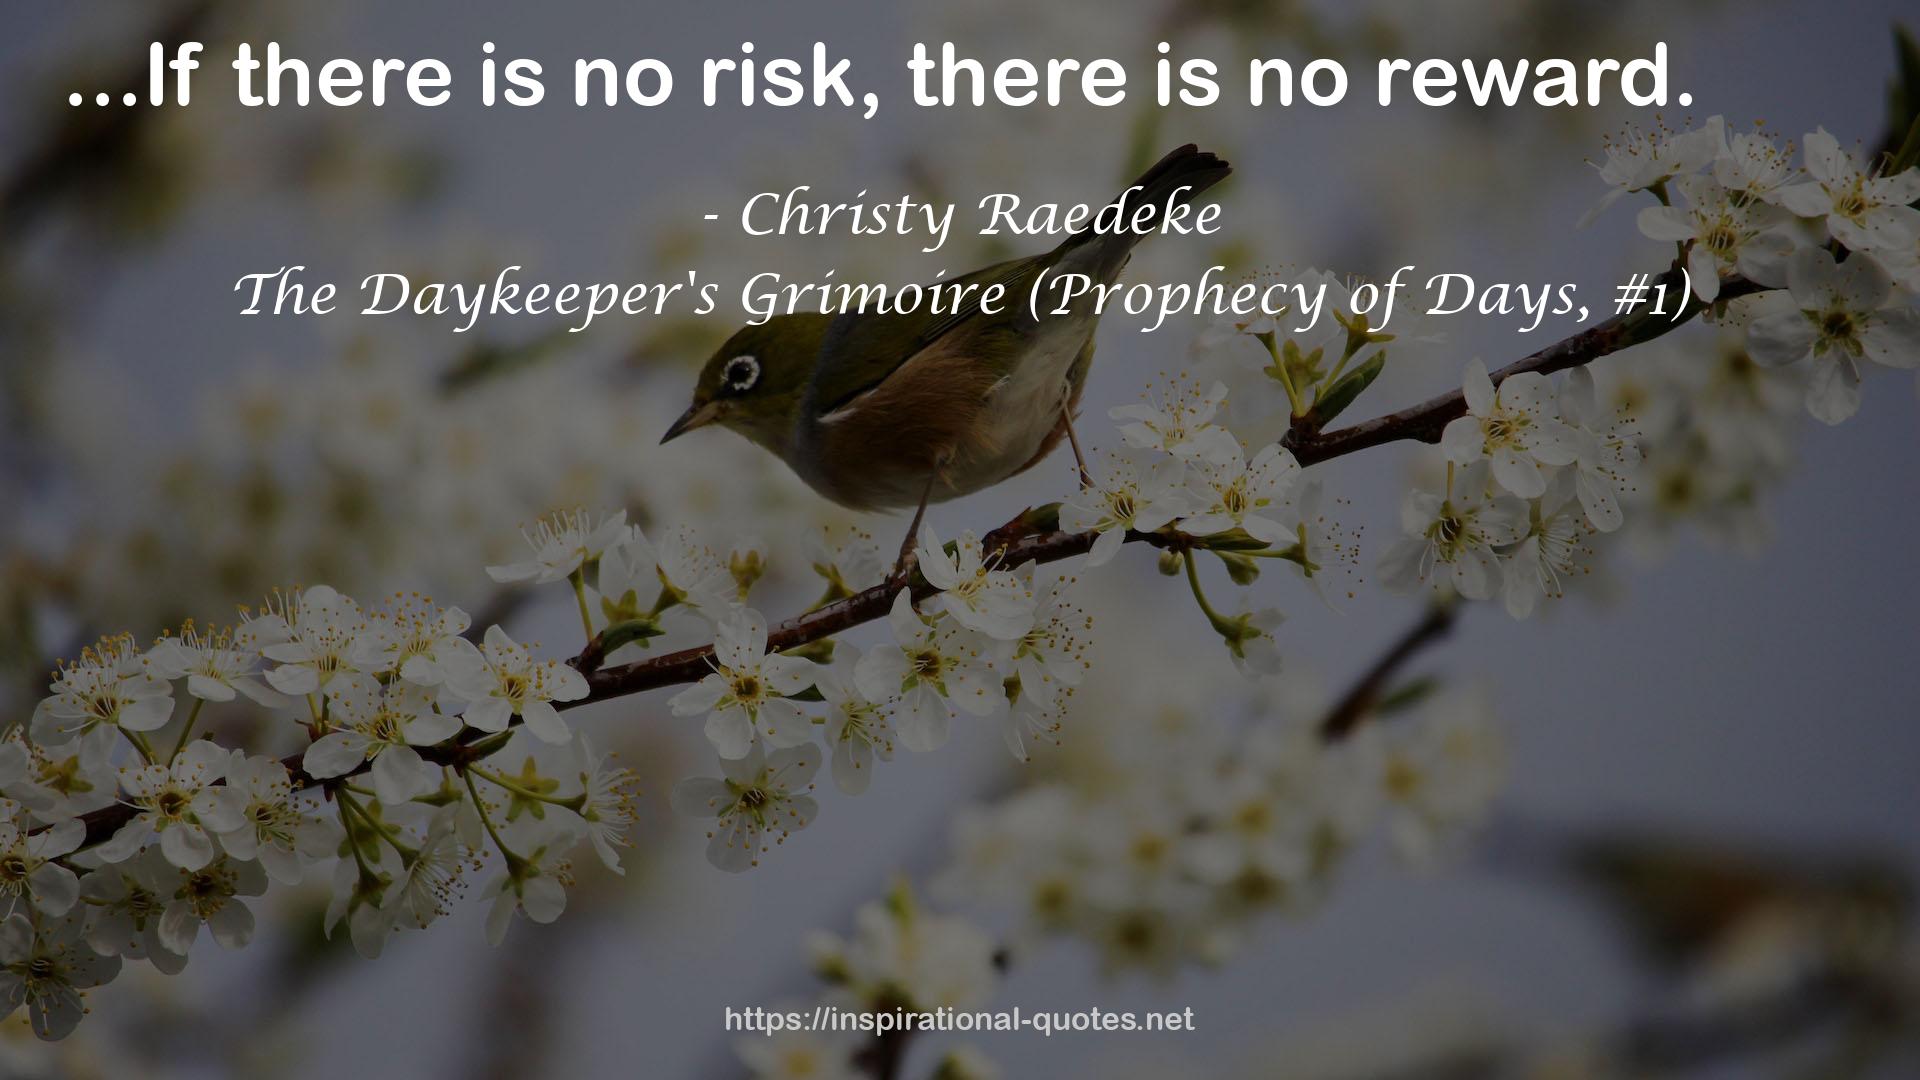 Christy Raedeke QUOTES